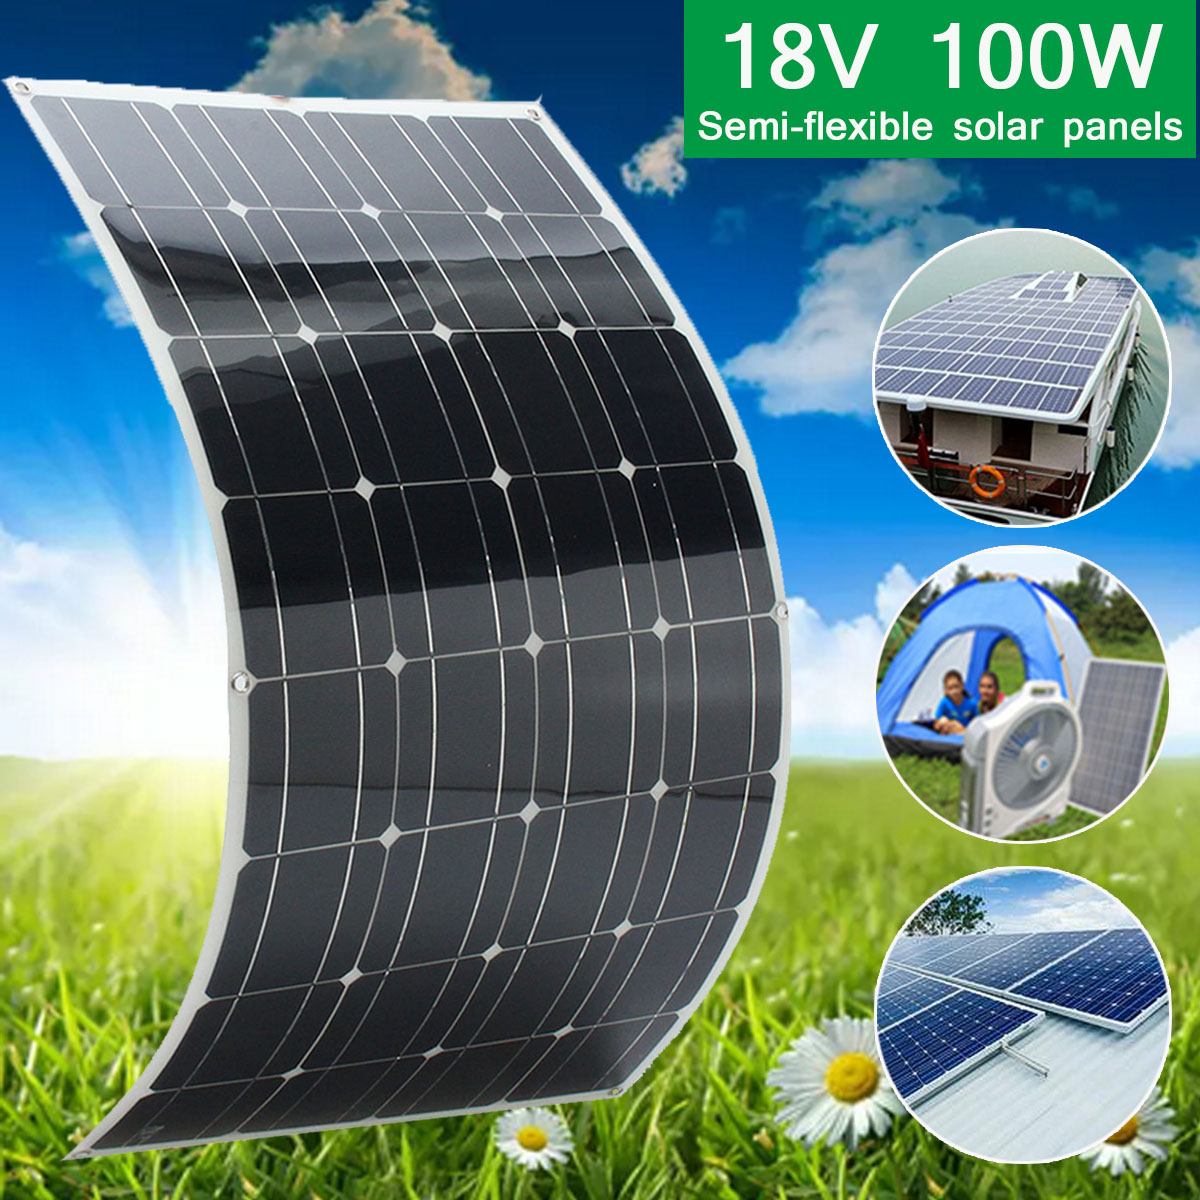 Elfeland® SP-38 18V 100W 1050x540x2.5mm Flexible Solar Panel With 1.5m Cable 5